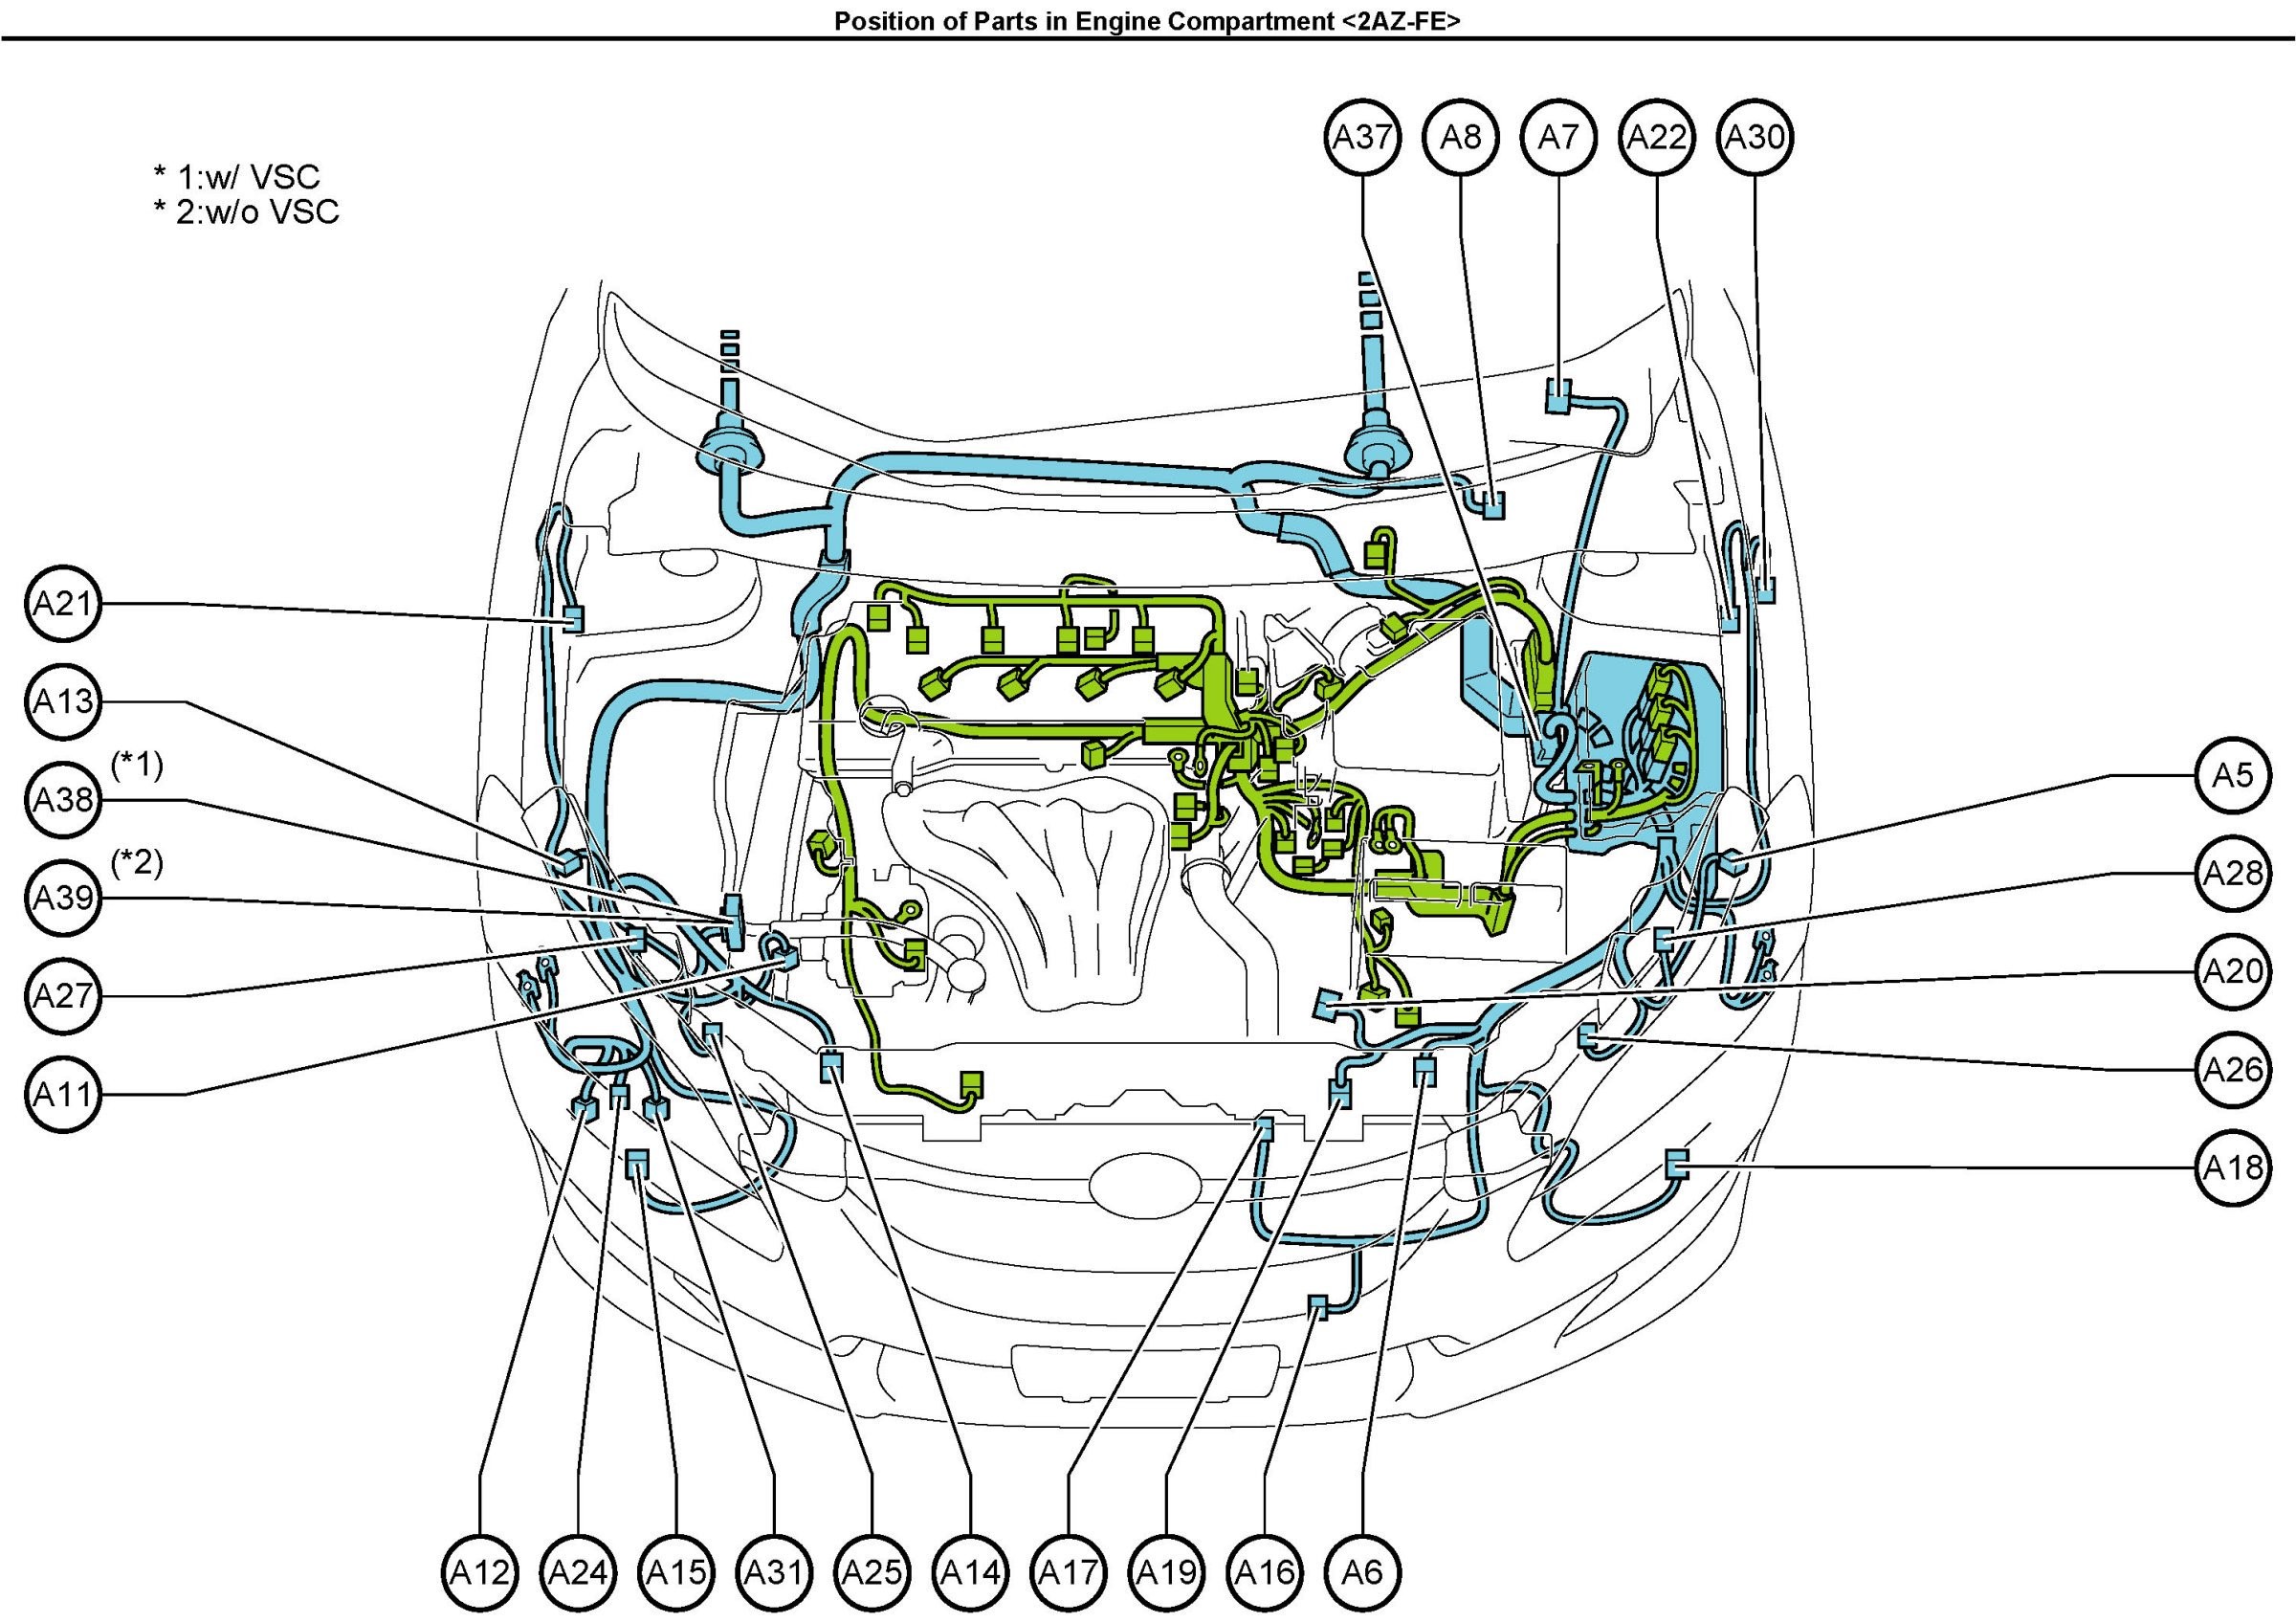 2004 toyota Camry Engine Parts Diagram 2007 Matrix Fuse Box Another Blog About Wiring Diagram • Of 2004 toyota Camry Engine Parts Diagram